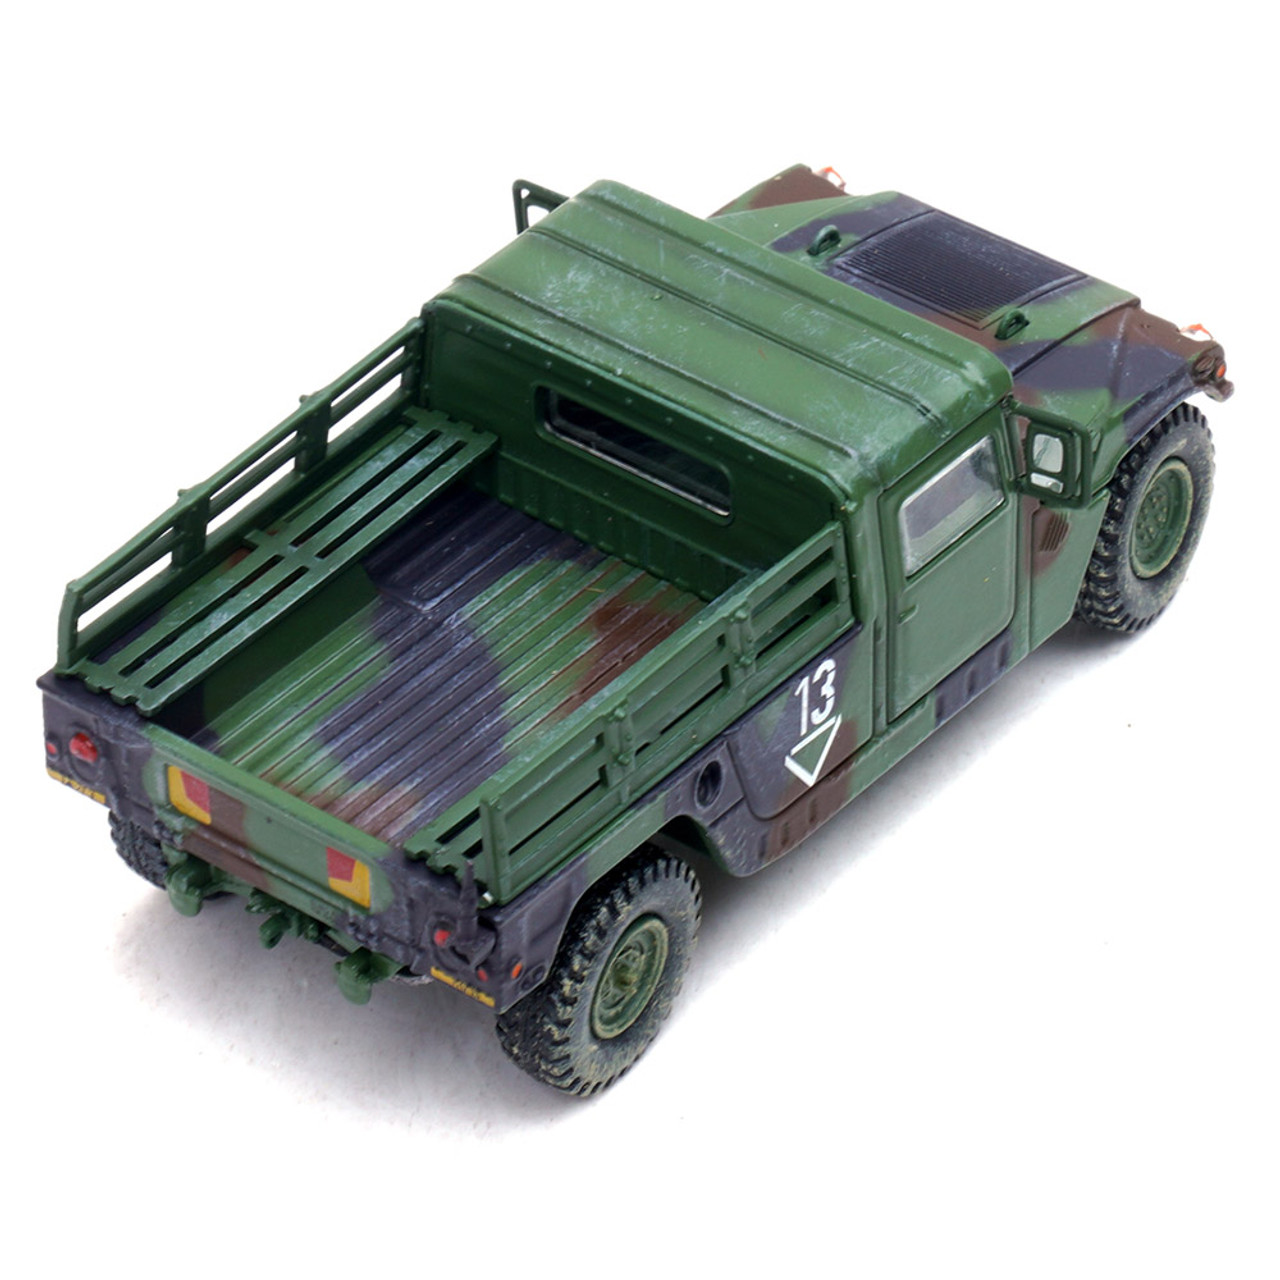 1:64 Panzerkampf - M998 HMMWV, 2nd Battalion, 3rd Field Artillery Regiment, 1st Armored Division, U.S. Army Stationed in Germany, Spring 1999